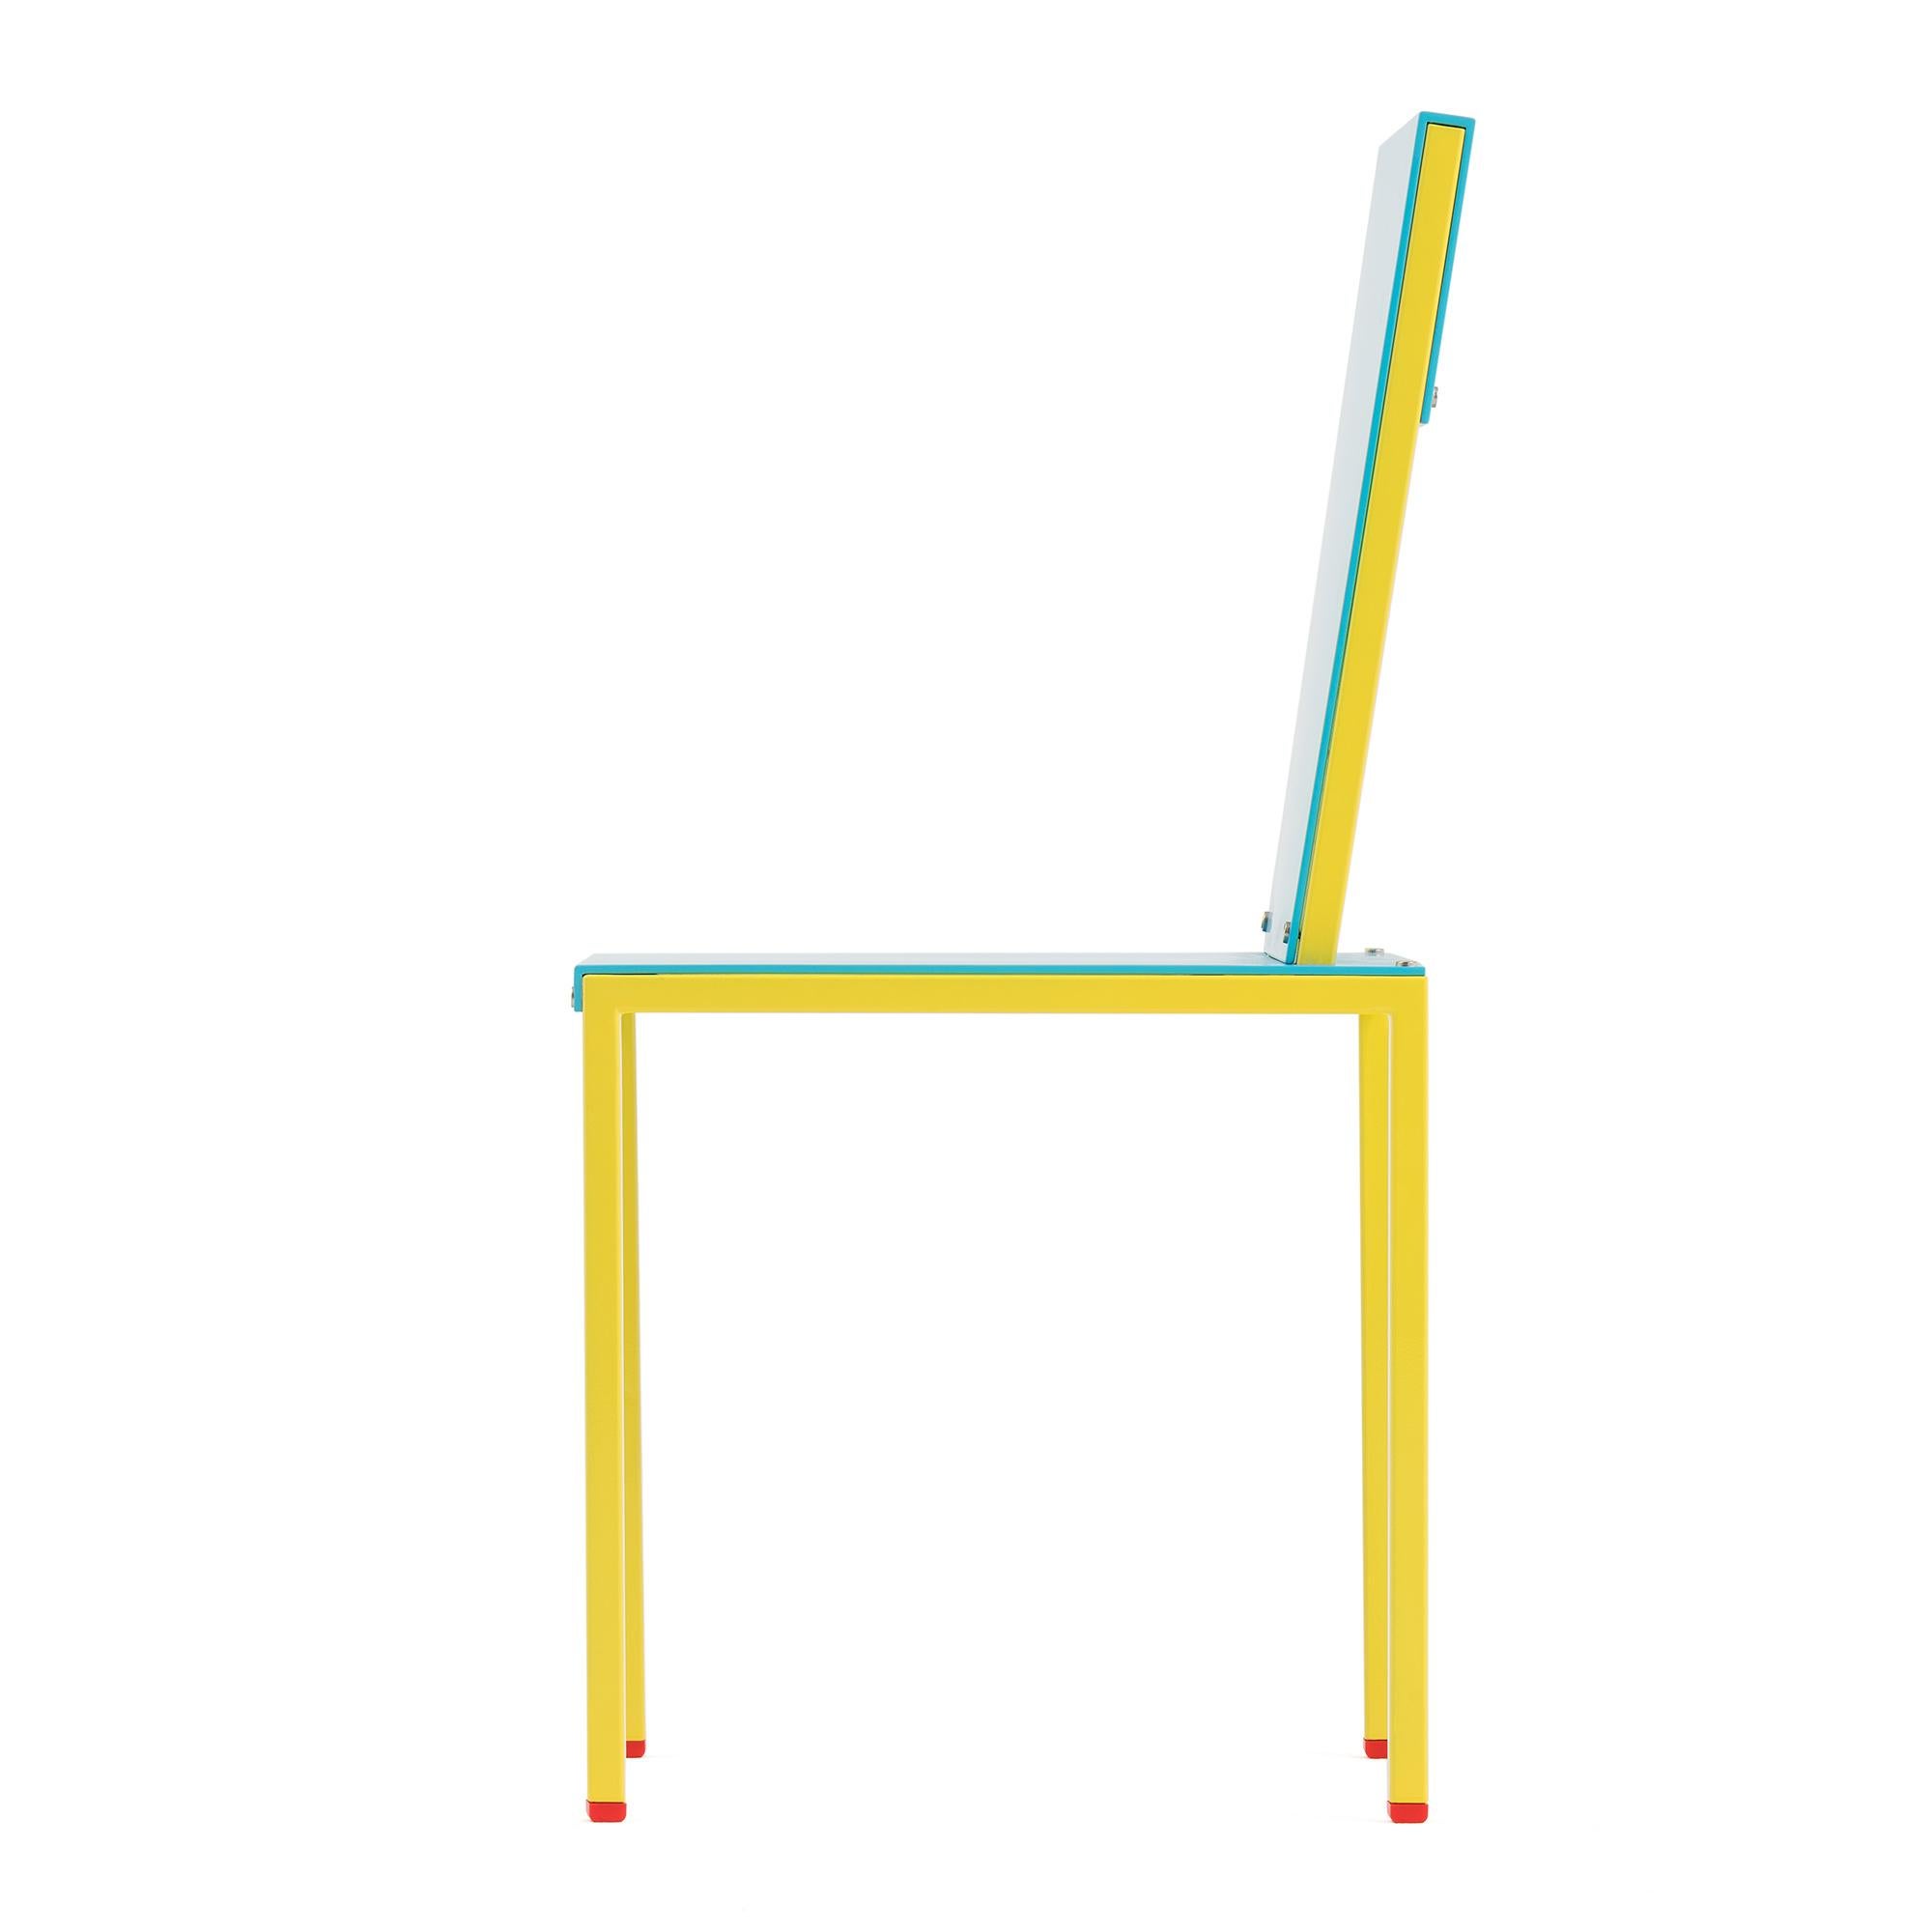 Primula chair in metal and wood by George J. Sowden by Post Design collection/Memphis

Additional Information:
Painted metal structure, painted wooden seat and back, feet in rubber.
Collection: Materialism
Designer: George J. Sowden
Year: